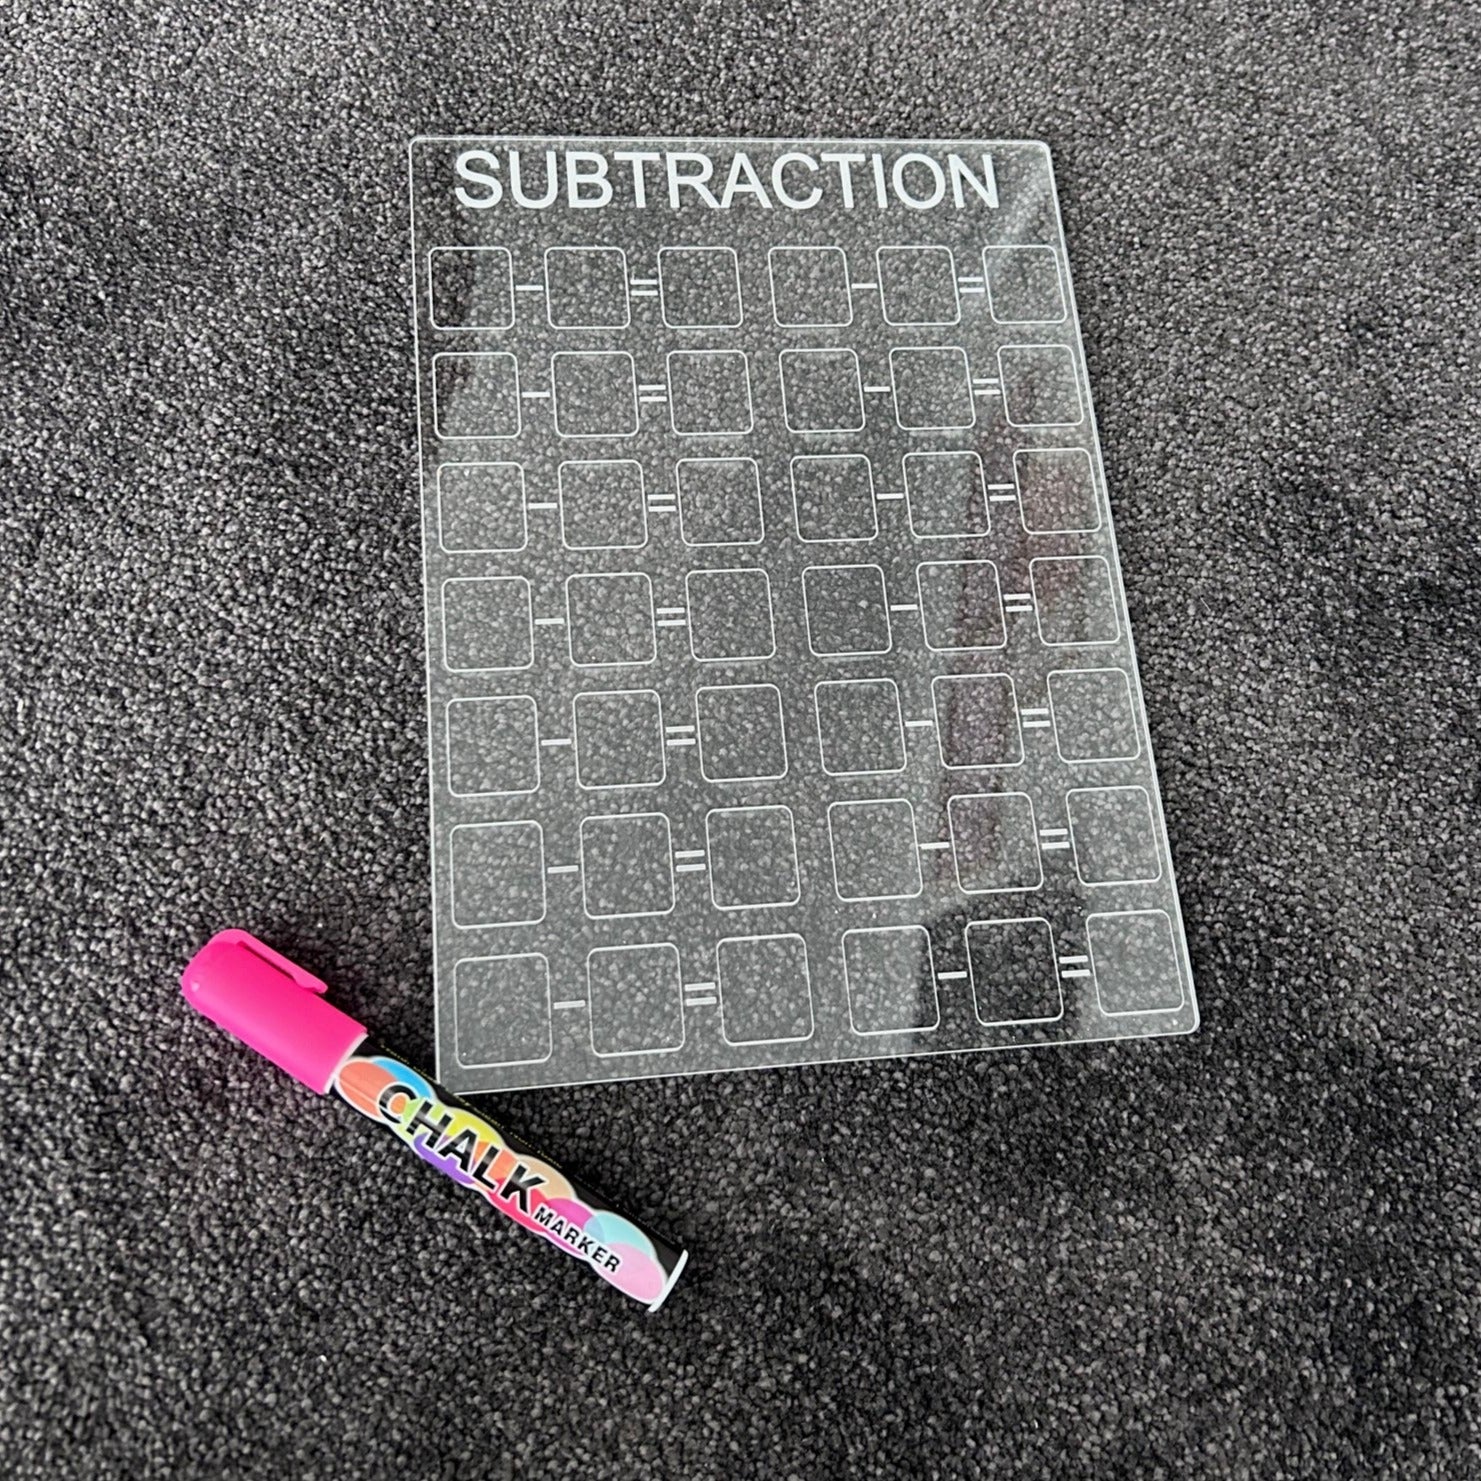 Subtraction Maths Equation Board with Chalk Marker